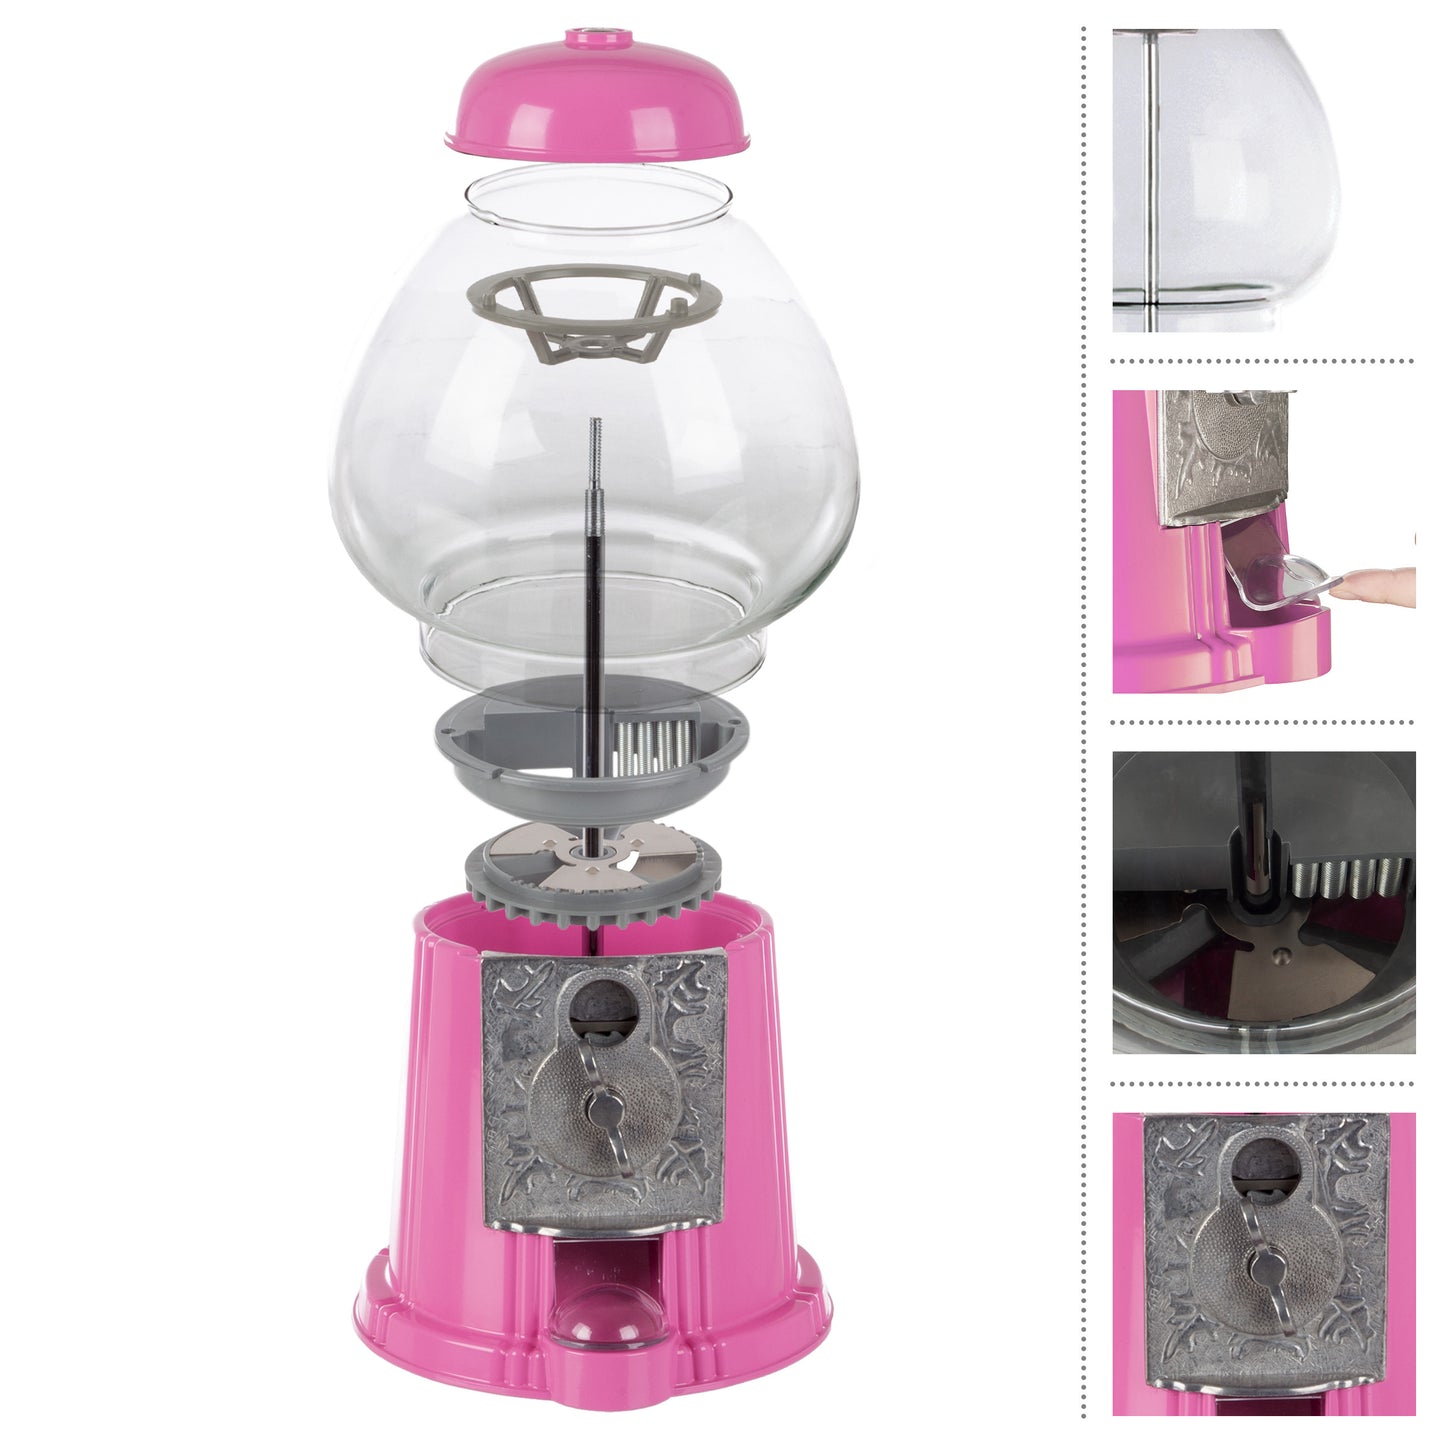 15" Gumball Machine with Coin Bank - Pink